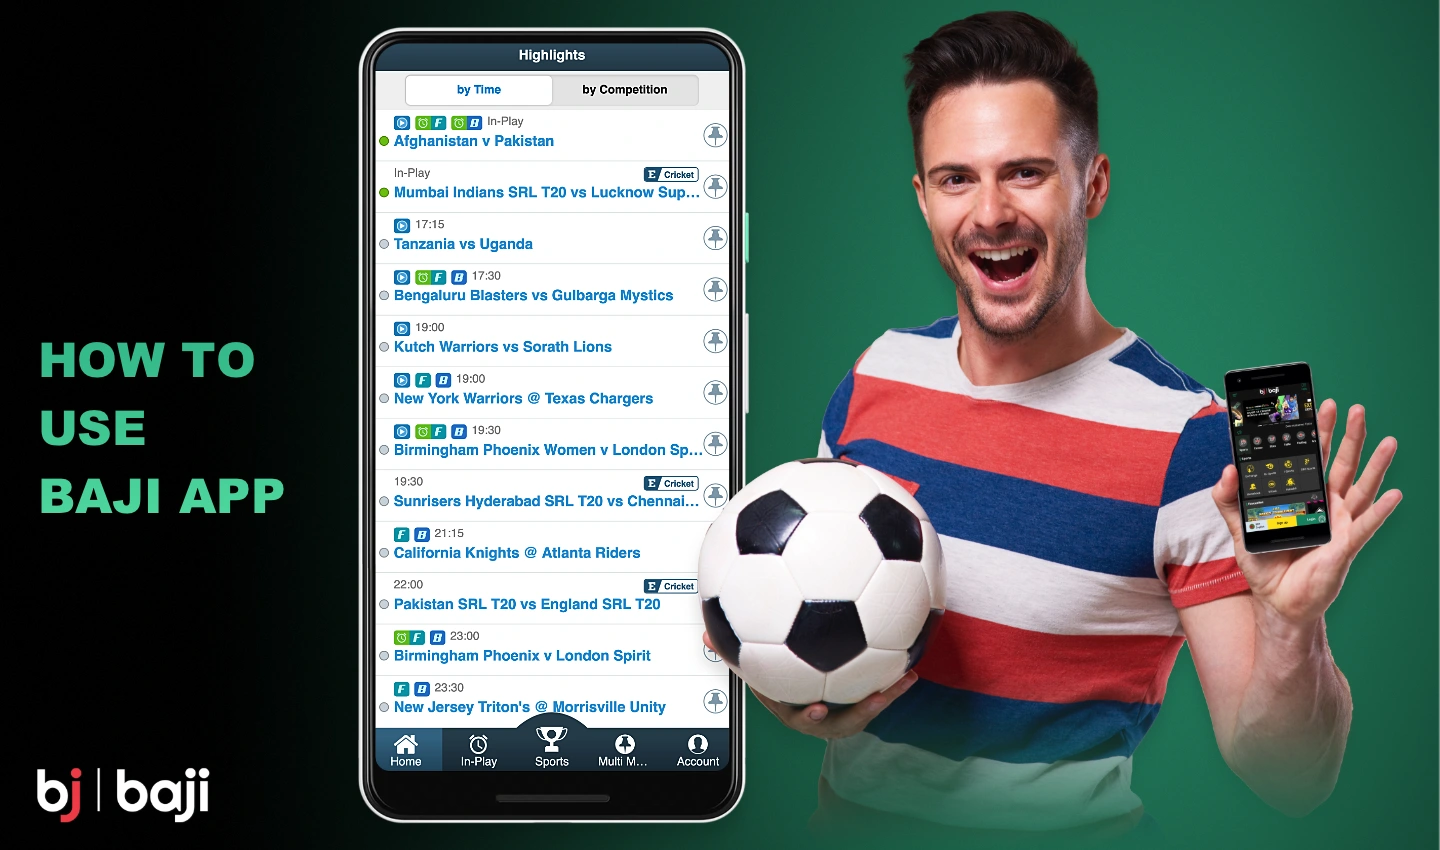 Baji's sports betting and casino app gives you access to hundreds of matches, games and other gambling activities